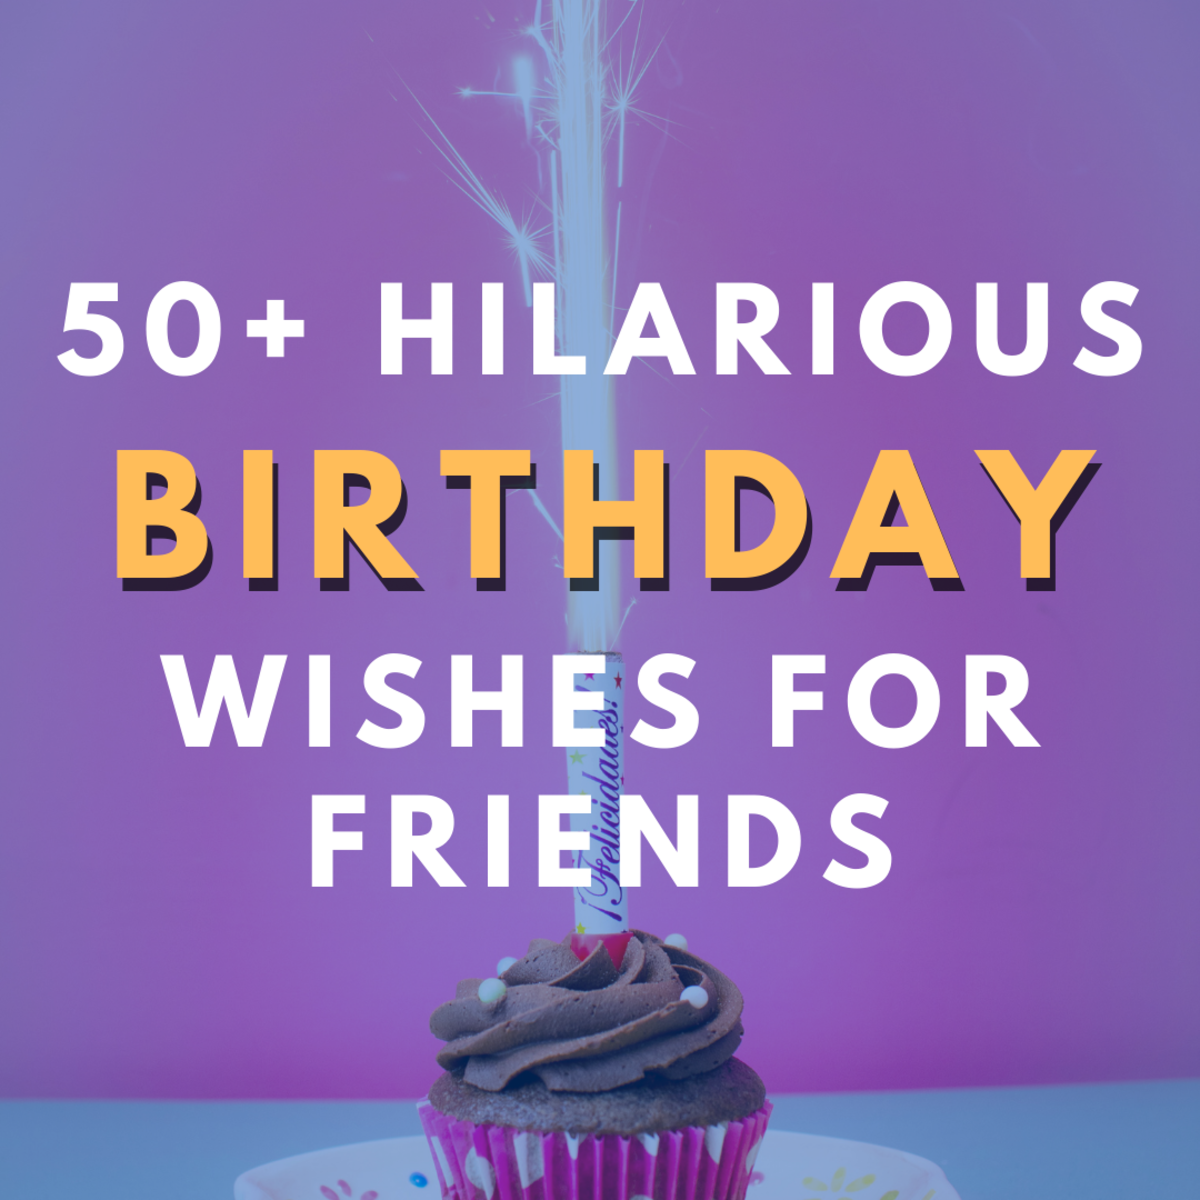 50+ Funny Birthday Greetings for Your Friends